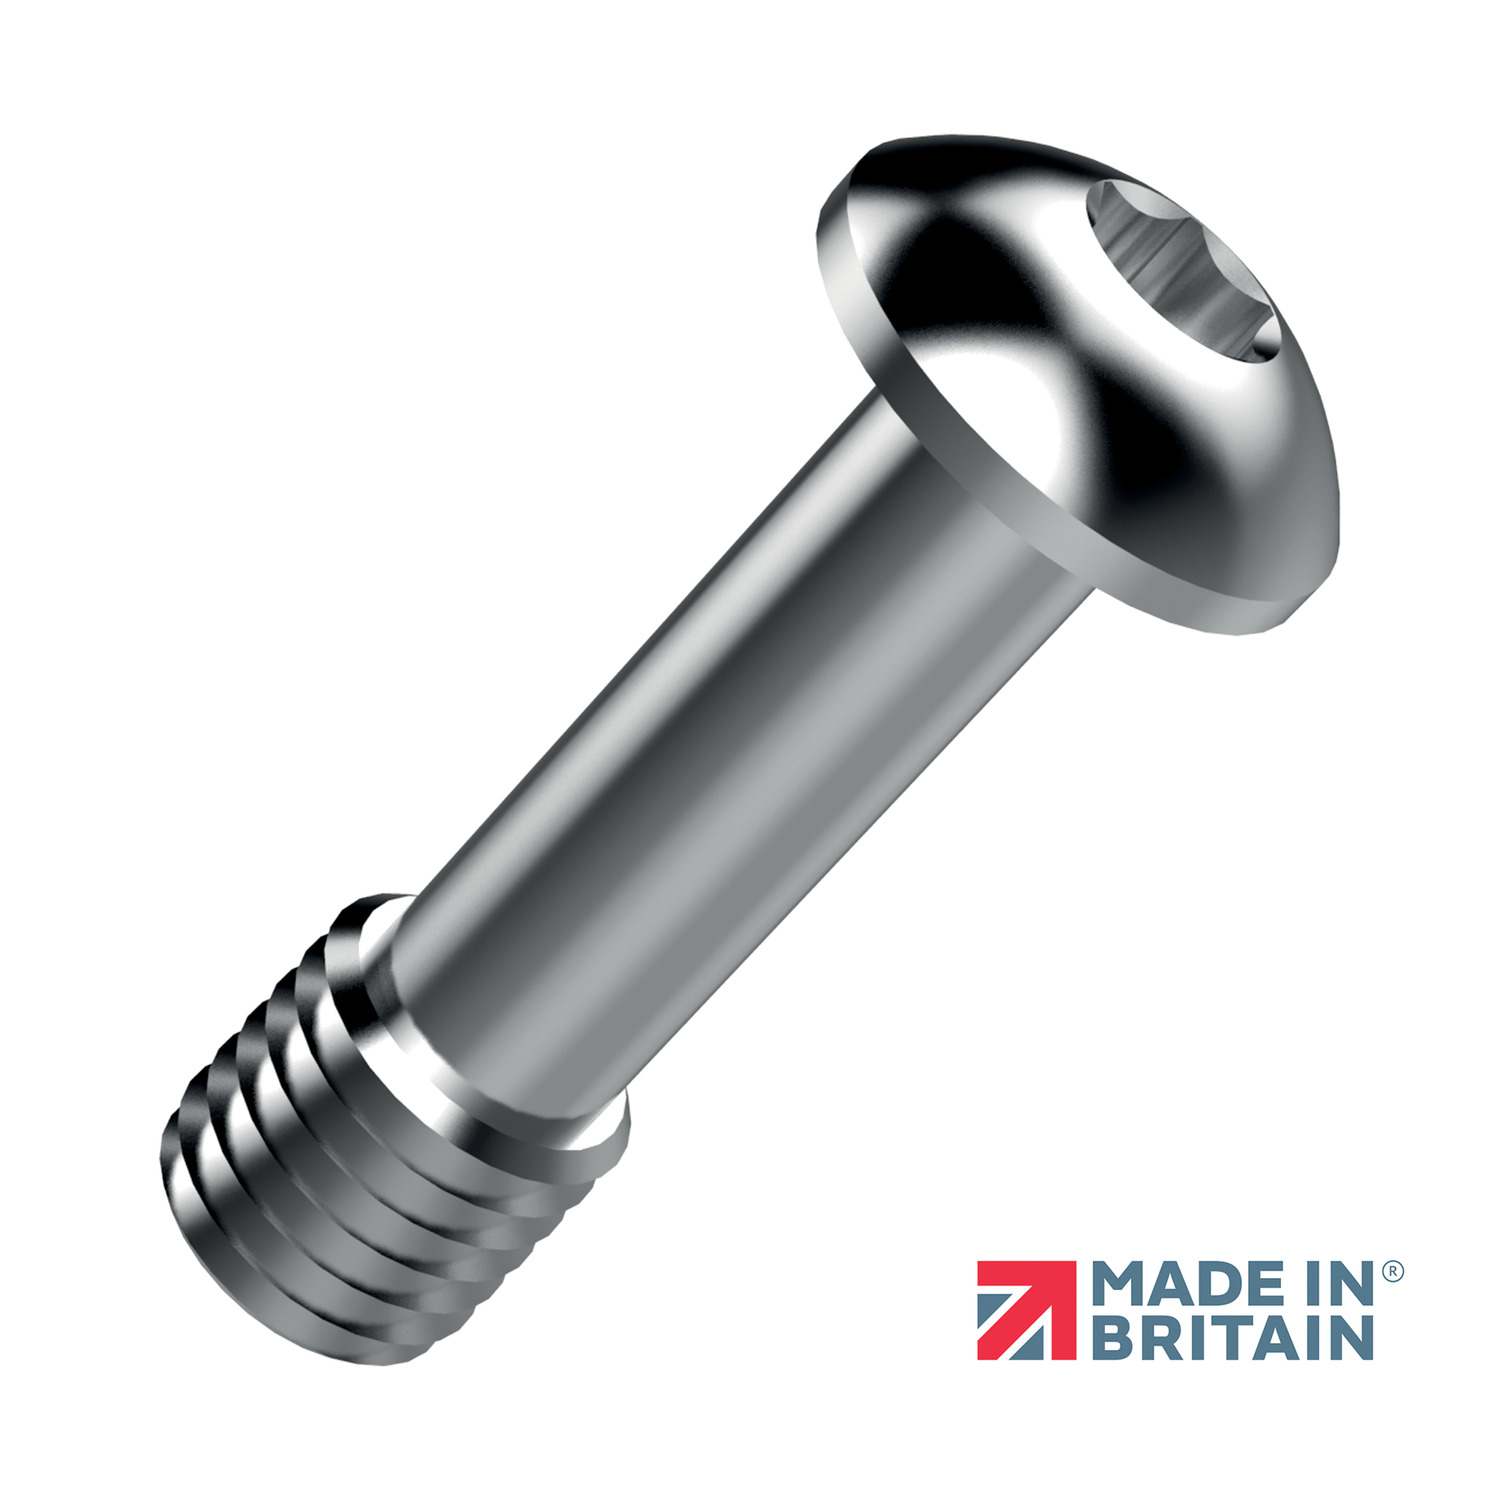 Captive Screws - Button Head Captive button head screws with TX drive (or hex drive - see P0151). Available in stock in stainless steel (AISI 303 and 316 series) and titanium (grades 2 and 5). Thread sizes M2,5 - M6, lengths 8 - 60mm.